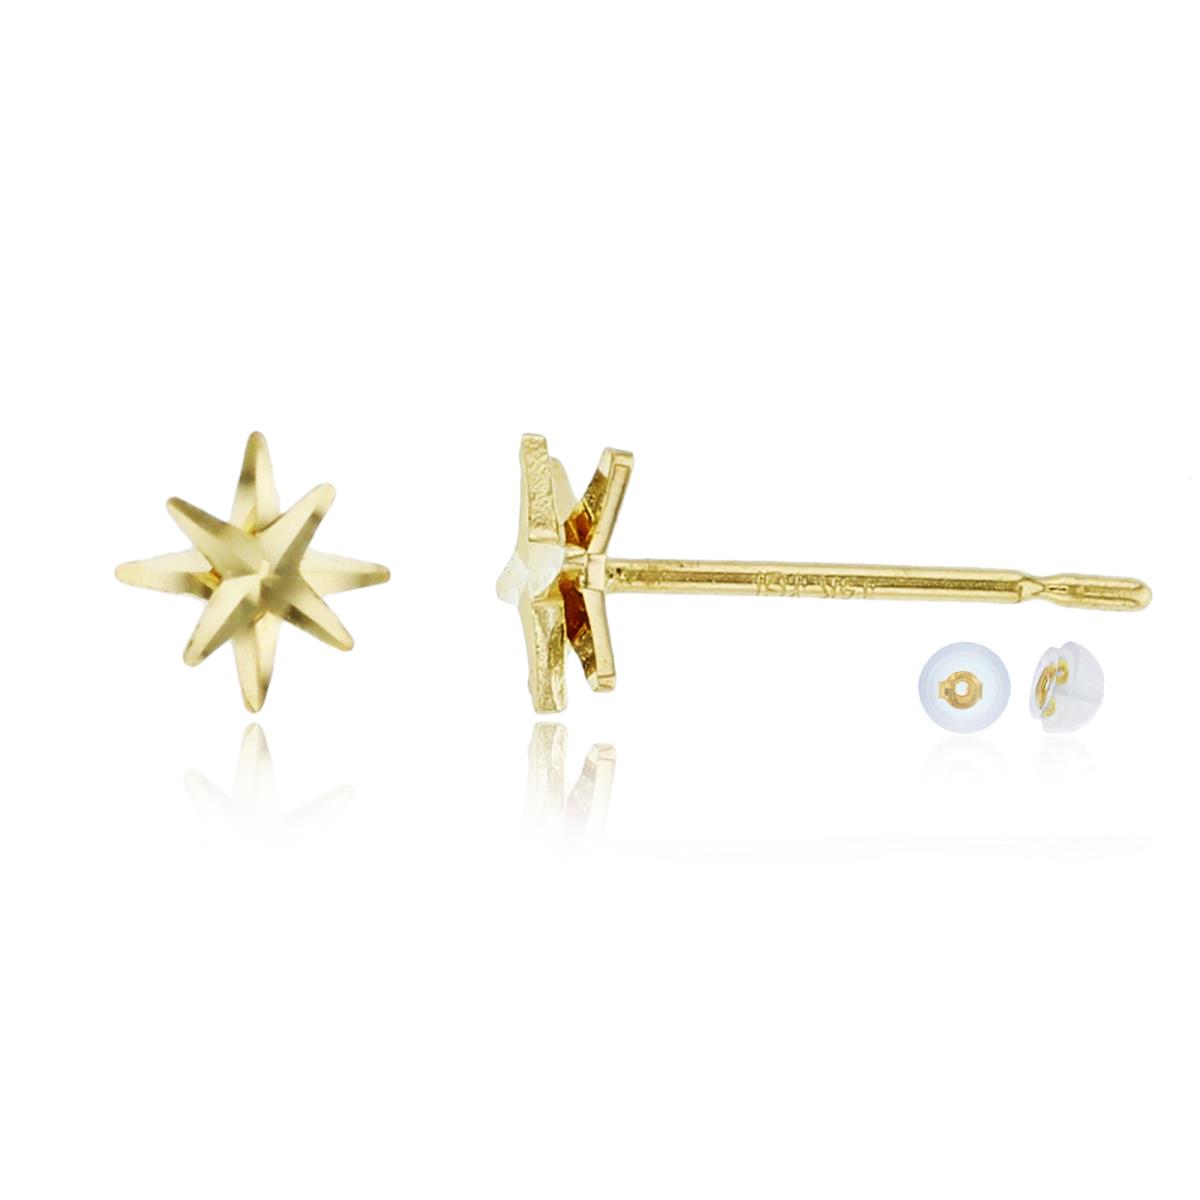 10K Yellow Gold 5x5mm Diamond Cut Starburst Stud Earring with Silicone Back